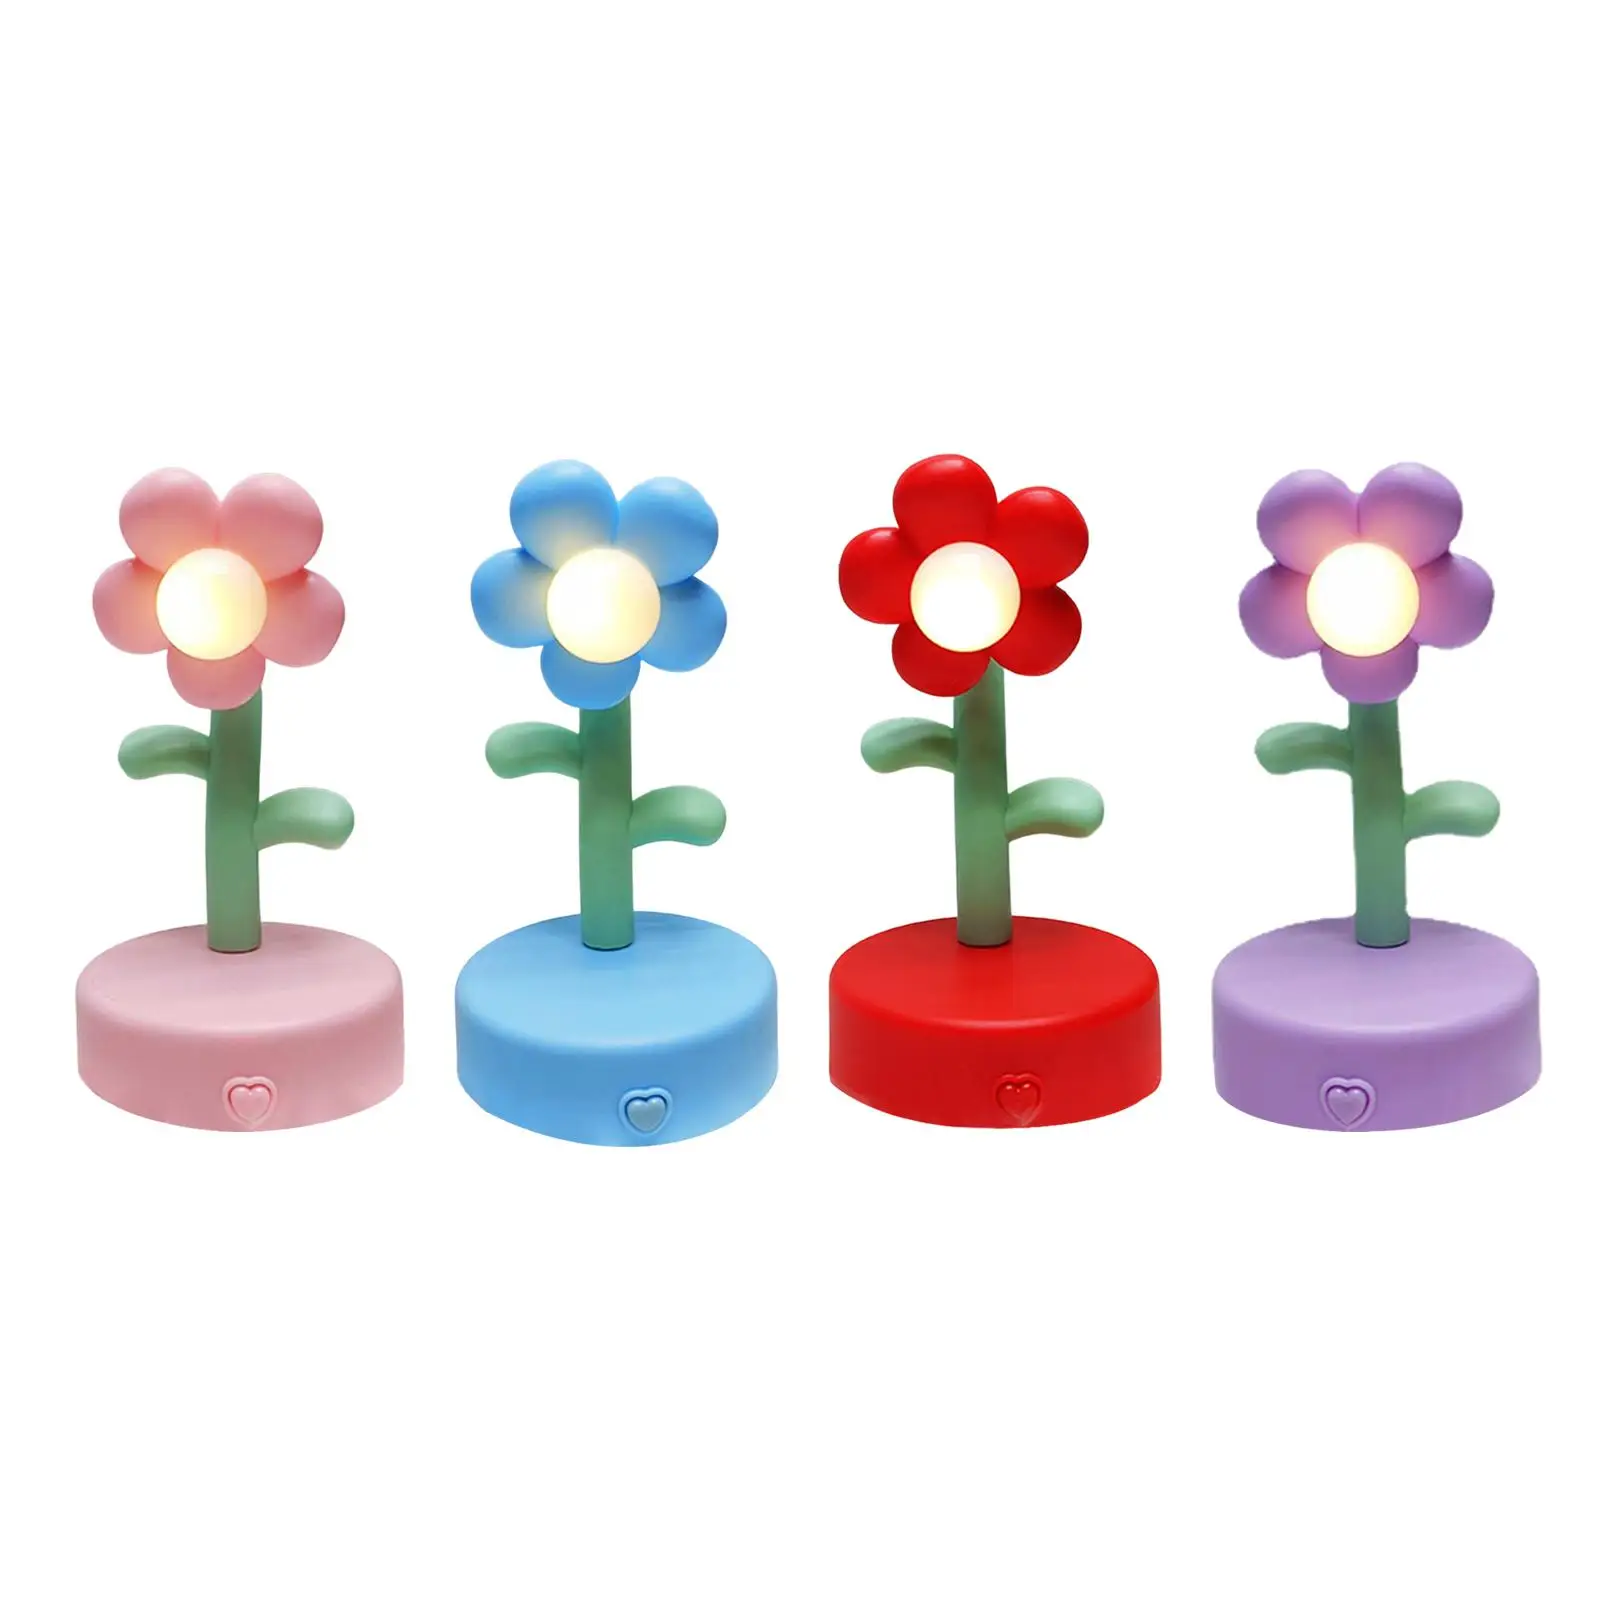 Creative Flower Table Lamp Night Light Portable Decorative Desk Lamp for Party Wedding Bedroom Decoration Birthday Gift